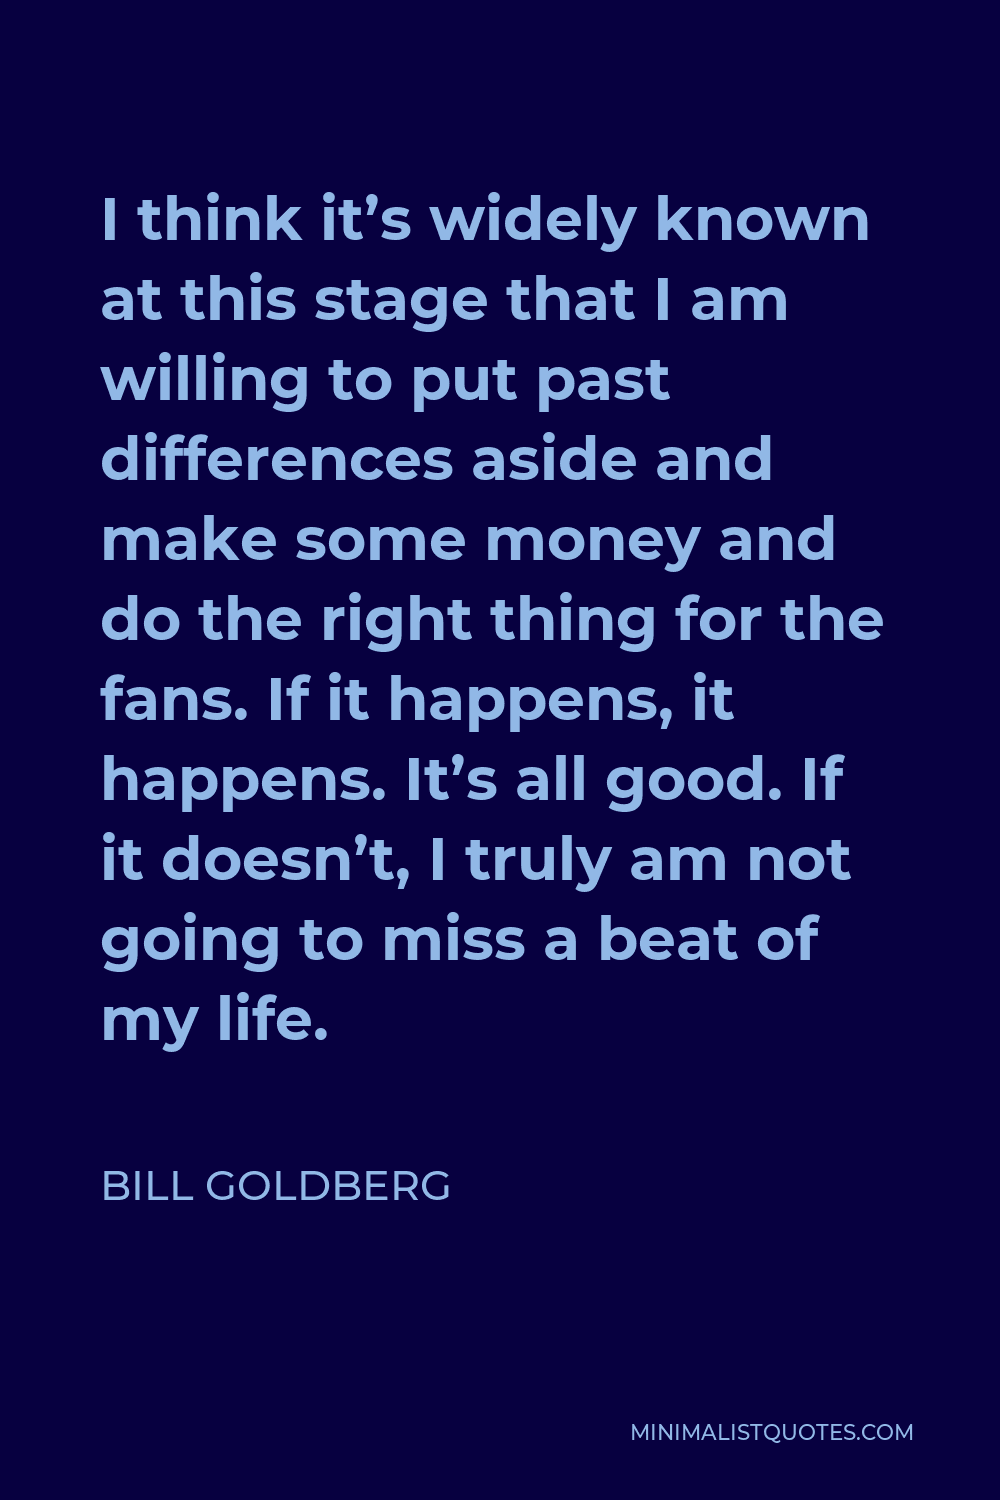 Bill Goldberg Quote - I think it’s widely known at this stage that I am willing to put past differences aside and make some money and do the right thing for the fans. If it happens, it happens. It’s all good. If it doesn’t, I truly am not going to miss a beat of my life.